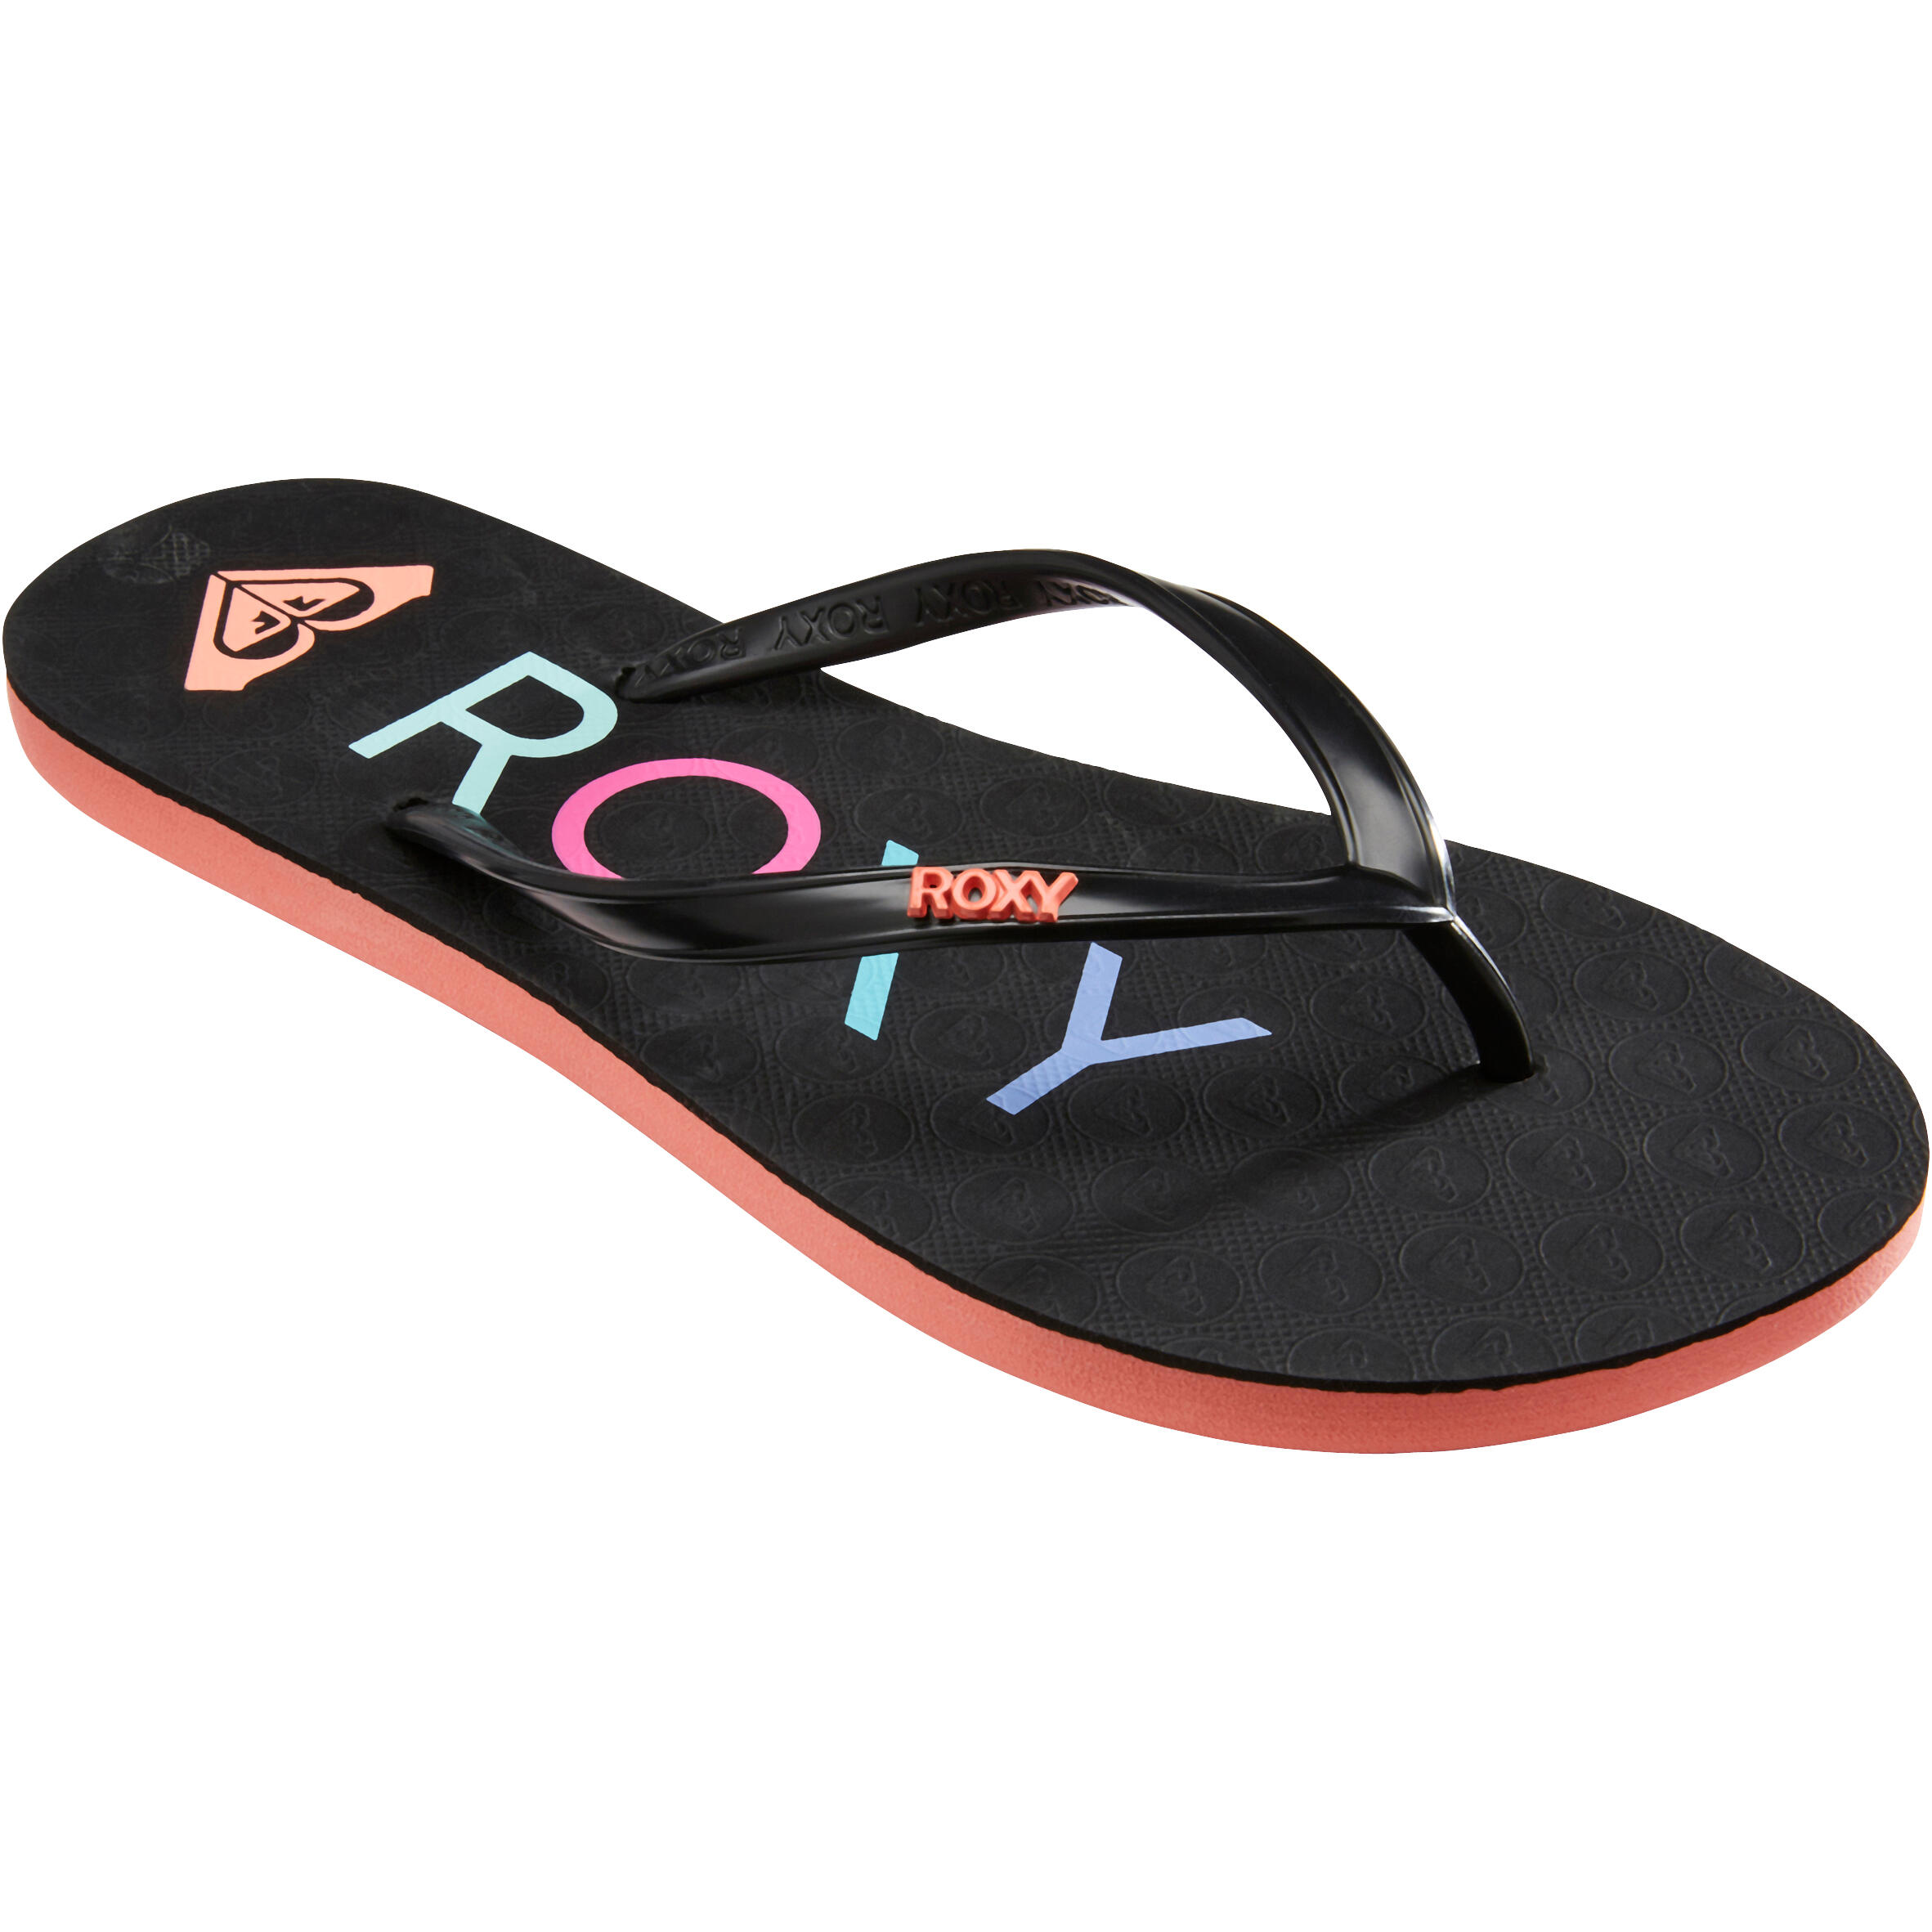 Porto flip-flops, Roxy, All Our Shoes